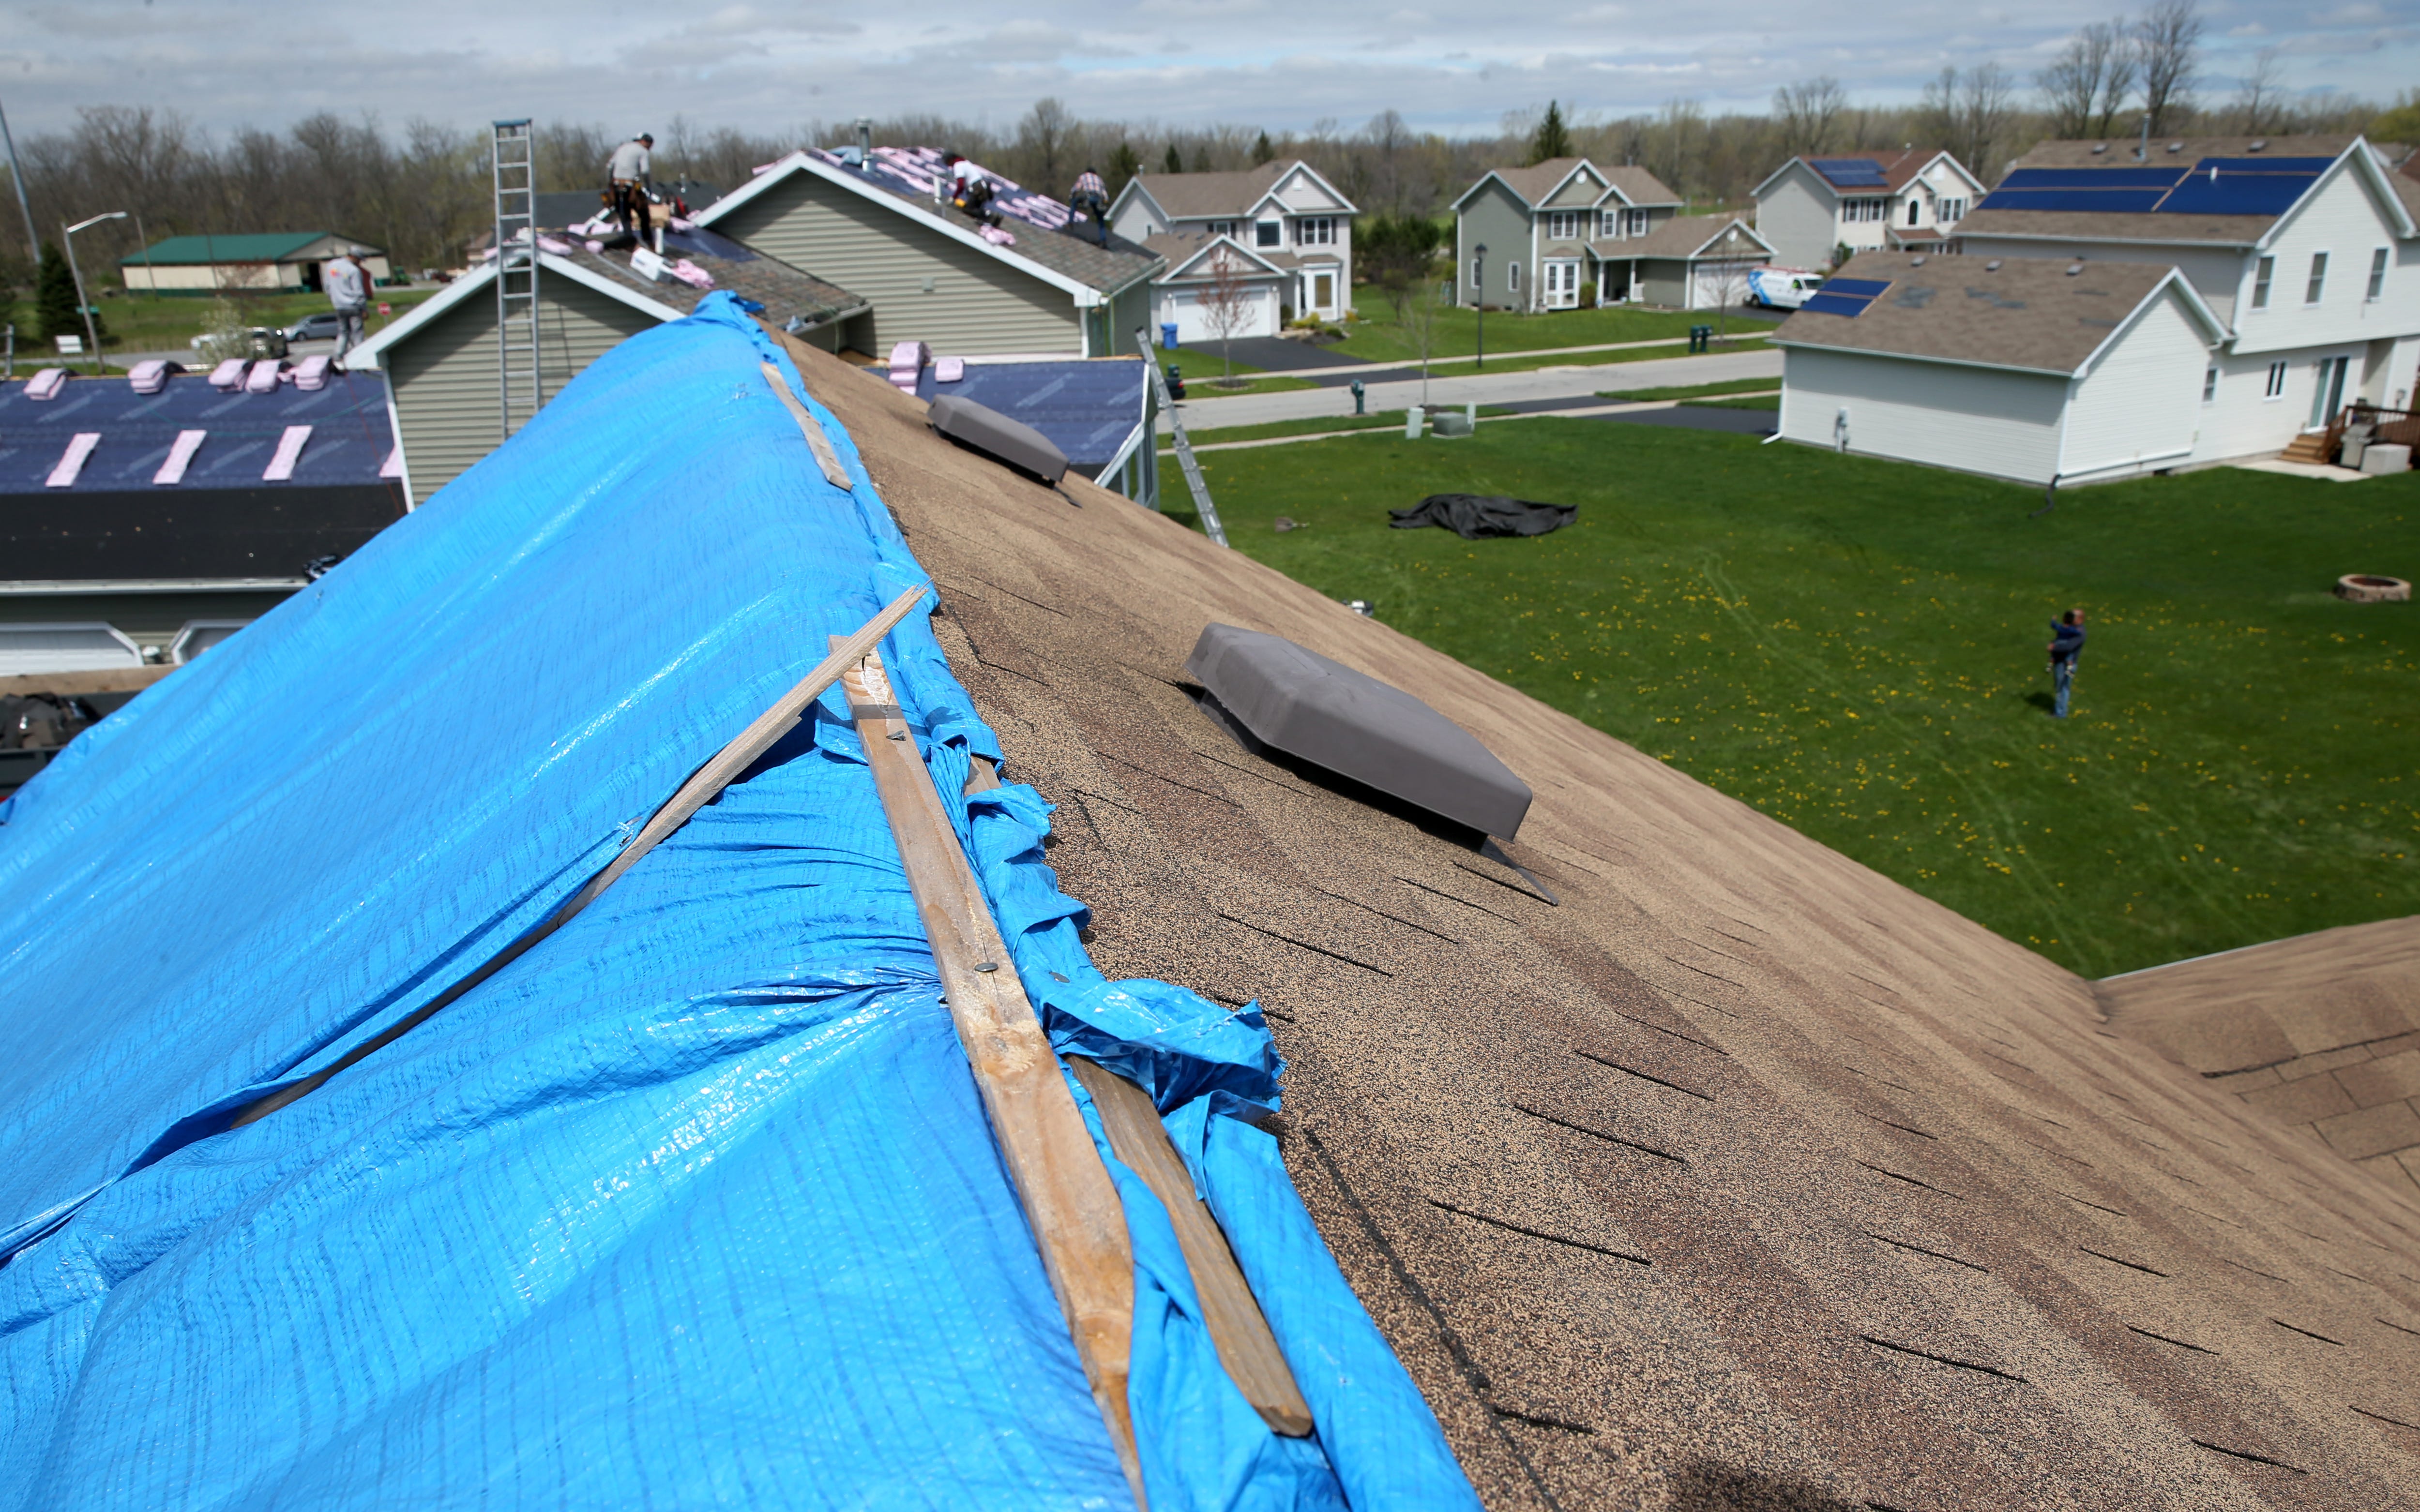 Henrietta, Chili residents caught in roofing nightmare